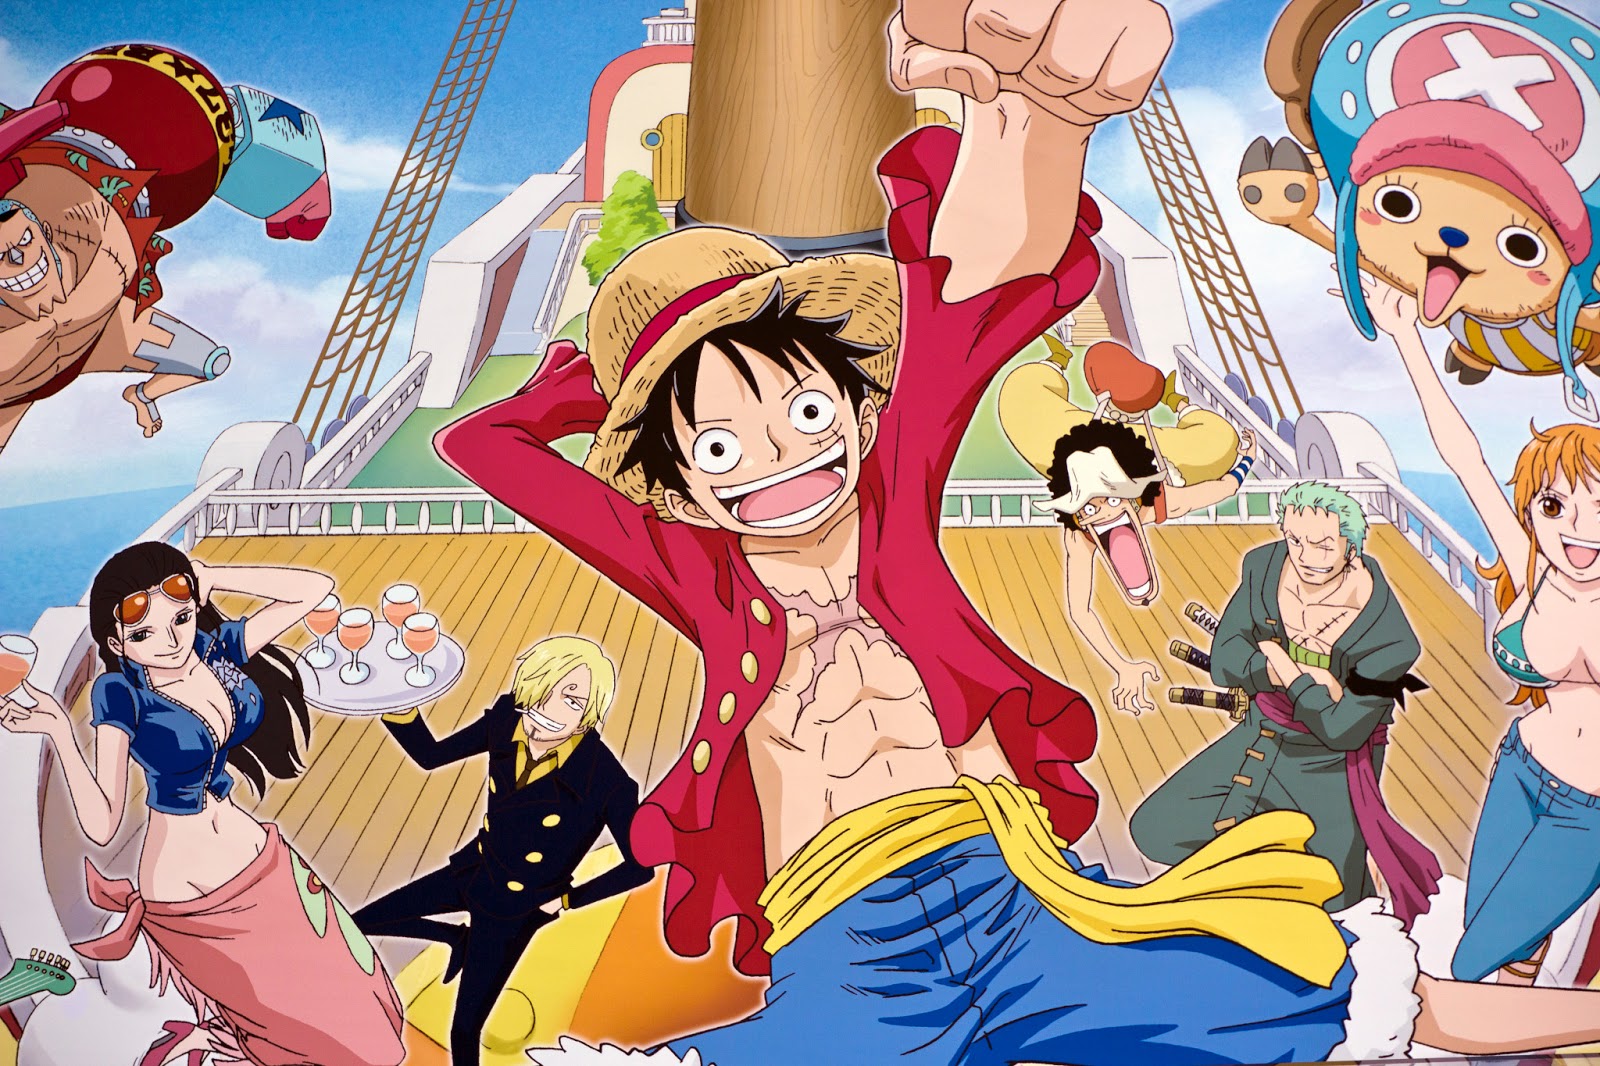 anime one piece wallpaper backgrounds - Cool Anime Wallpaper Backgrounds